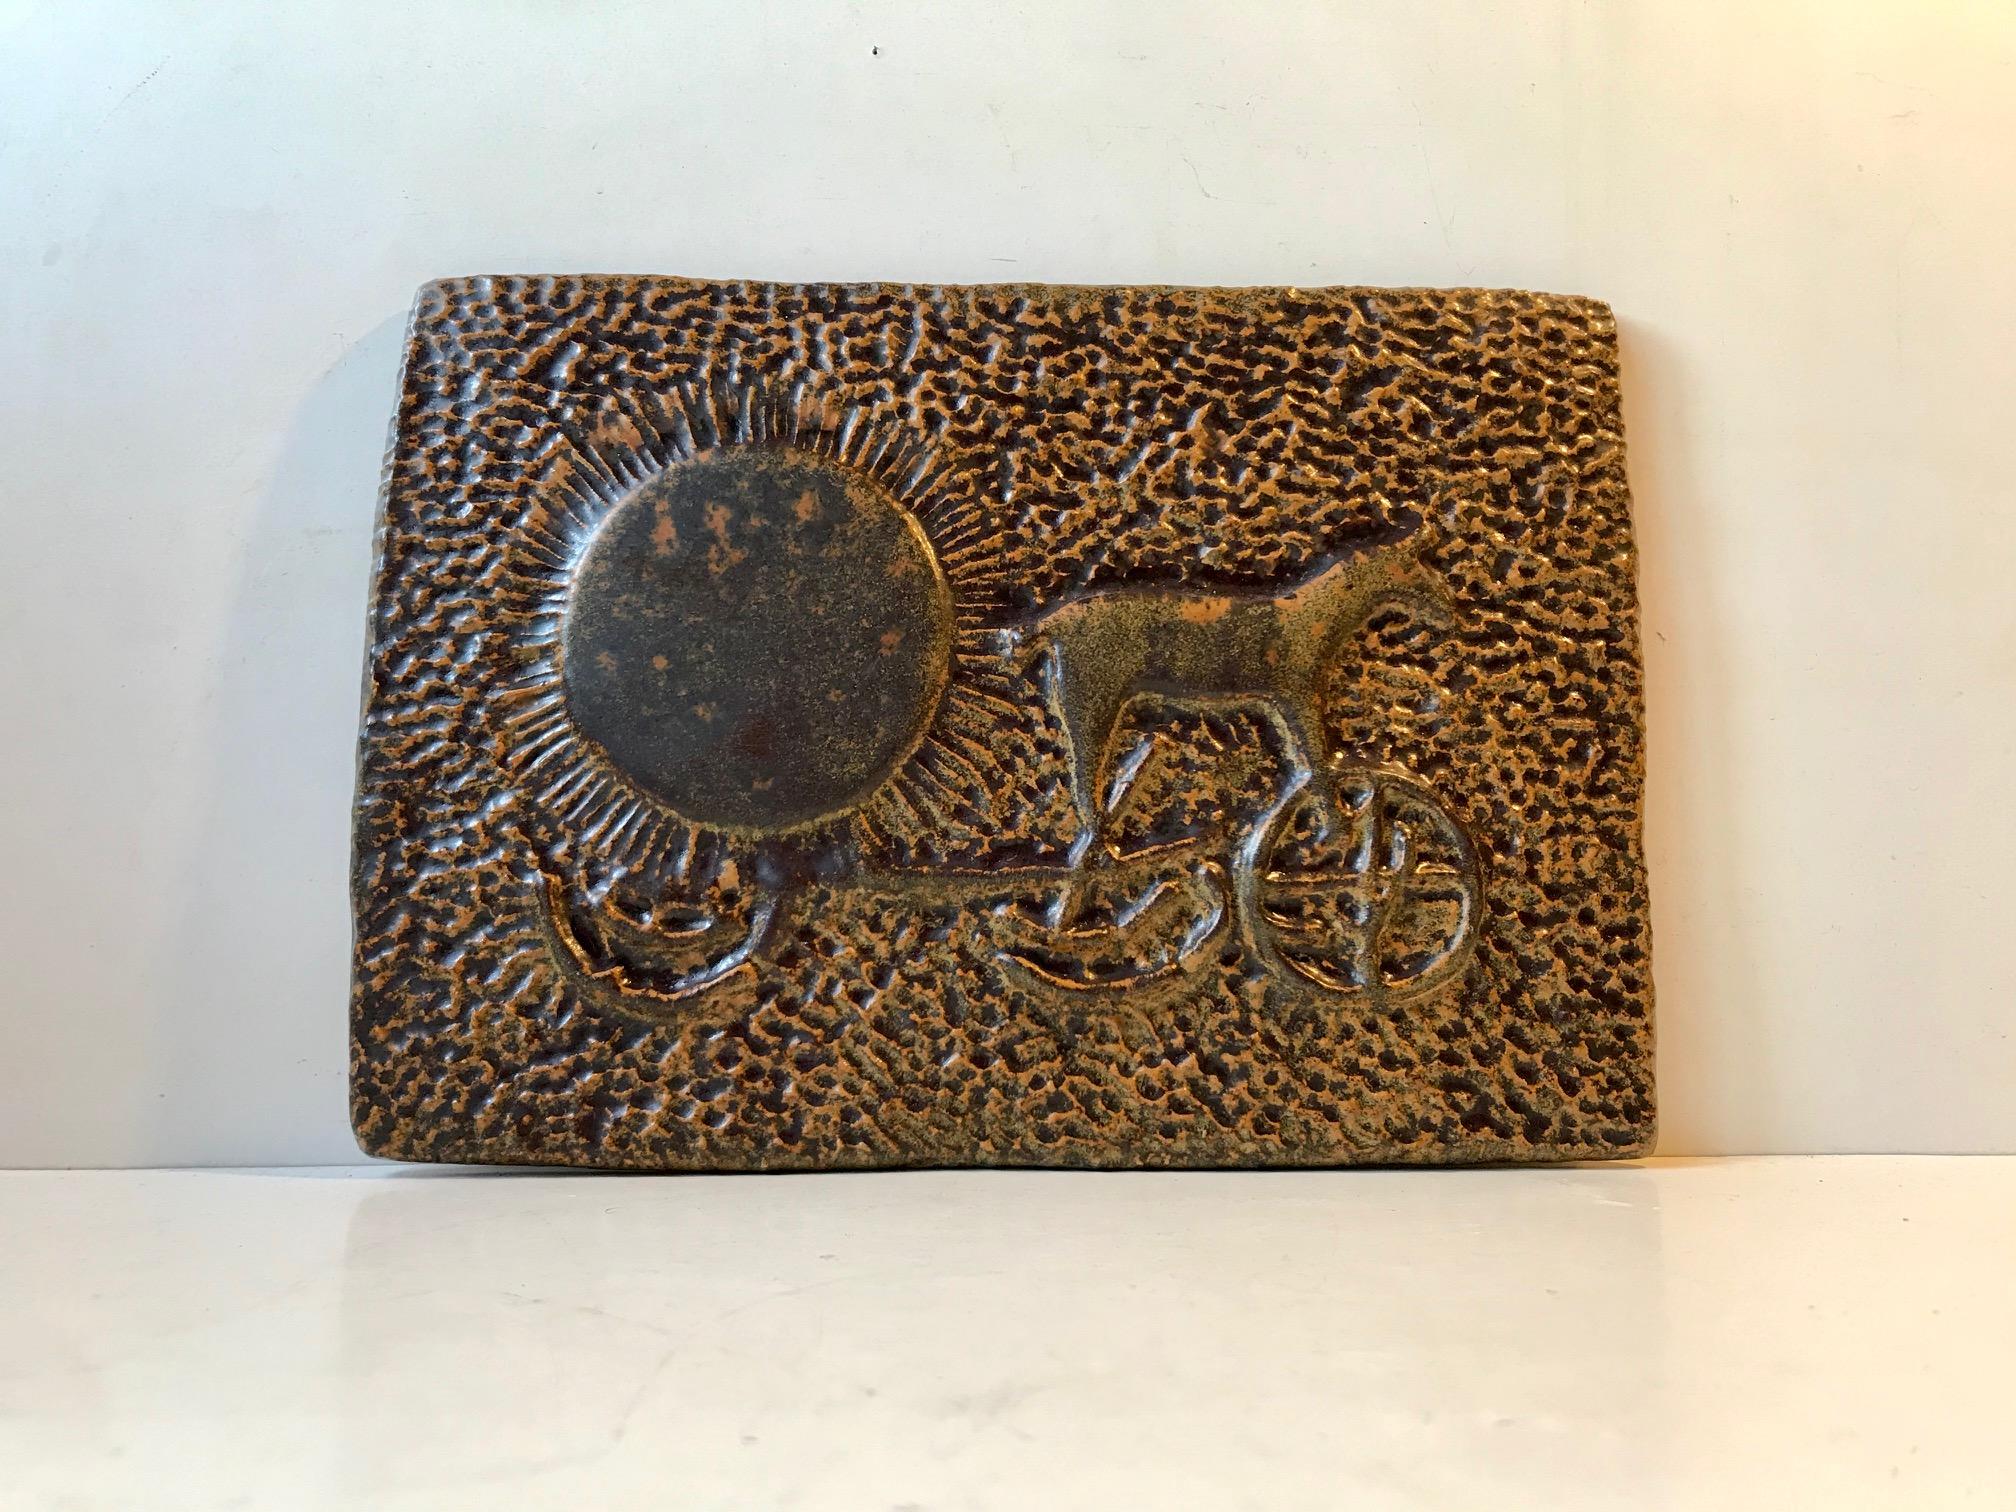 A depiction of The Bronze Age “Sun Chariot” – a very important Danish cultural icon, held in the National Museum of Denmark and even printed to the front side of the most valuable money note we have in Denmark. The Sun Chariot was found in Trundholm